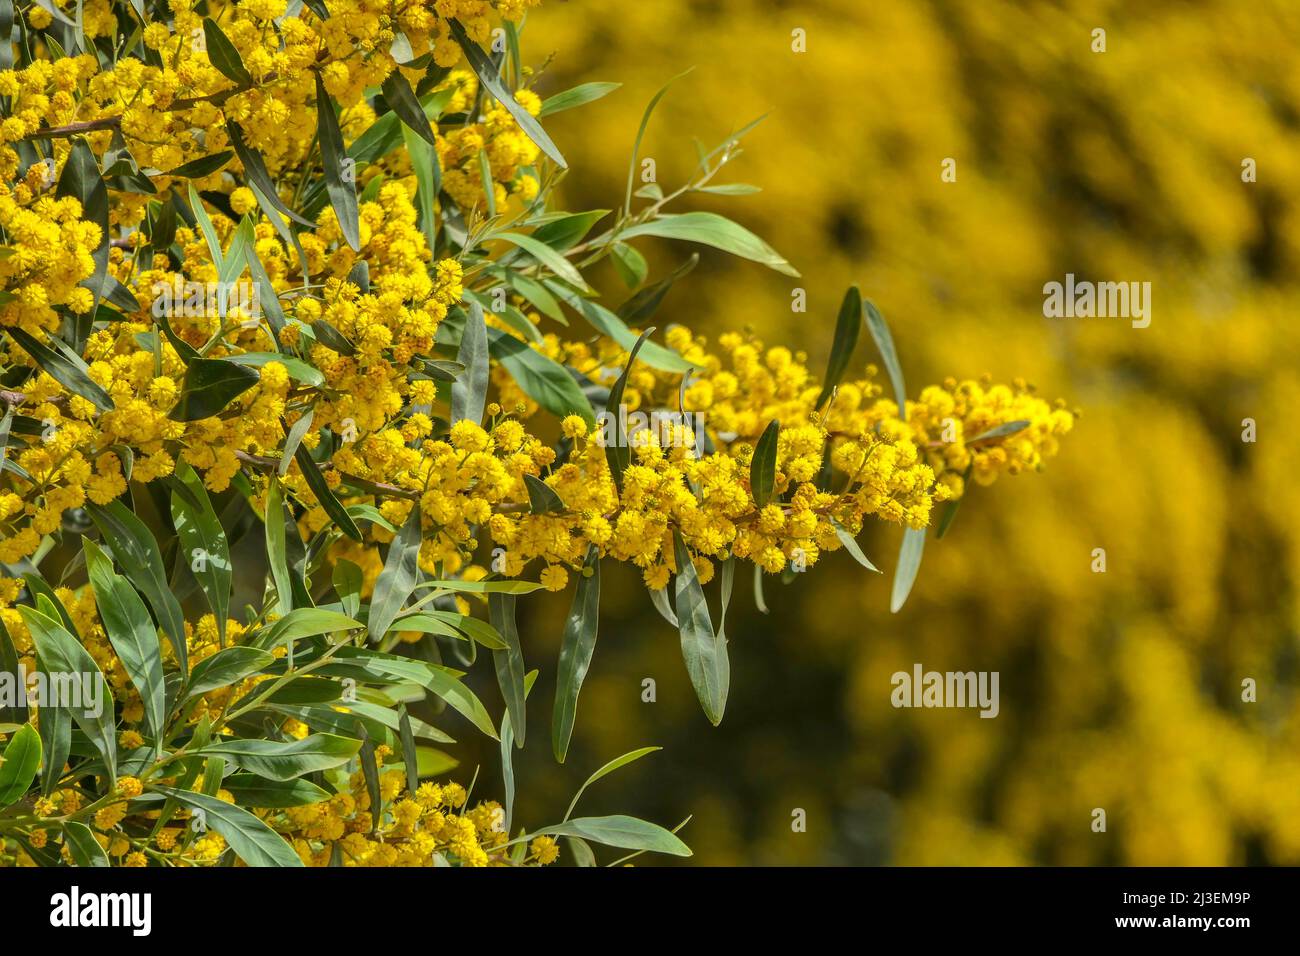 Yellow flowers of a flowering Cootamundra wattle Acacia baileyana tree close-up on a blurred background Stock Photo